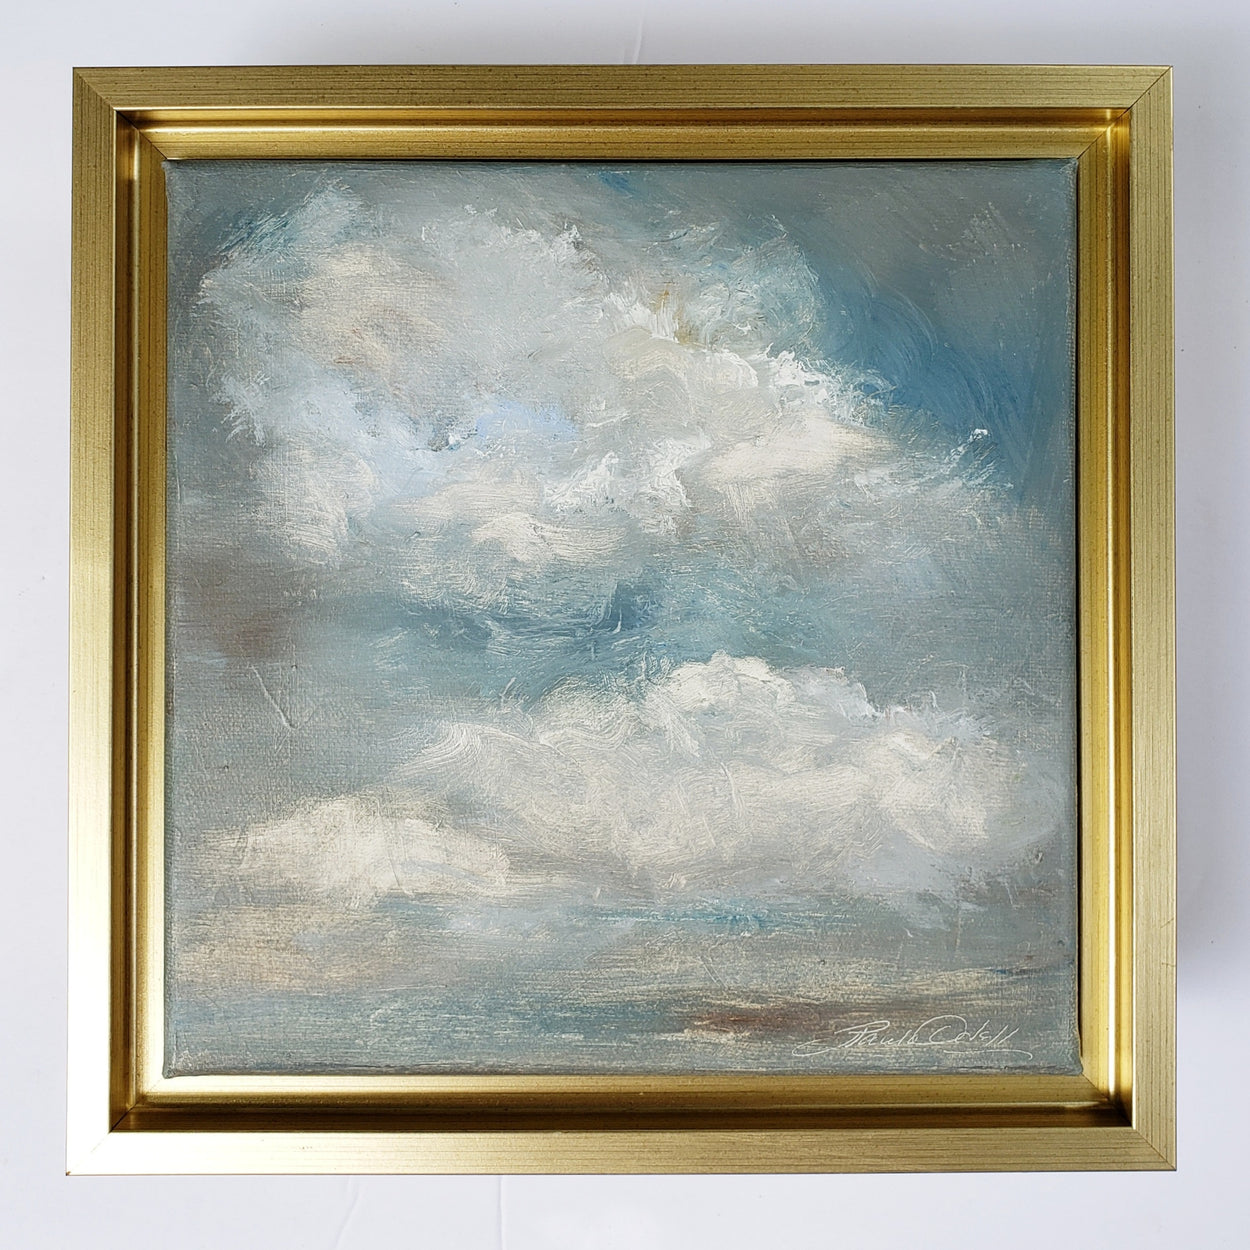 Original oil painting on canvas...Beautiful puffy clouds floating in a dream like cerulean sky. Framed in a gold wood frame ..will arrive wired and ready to hang.